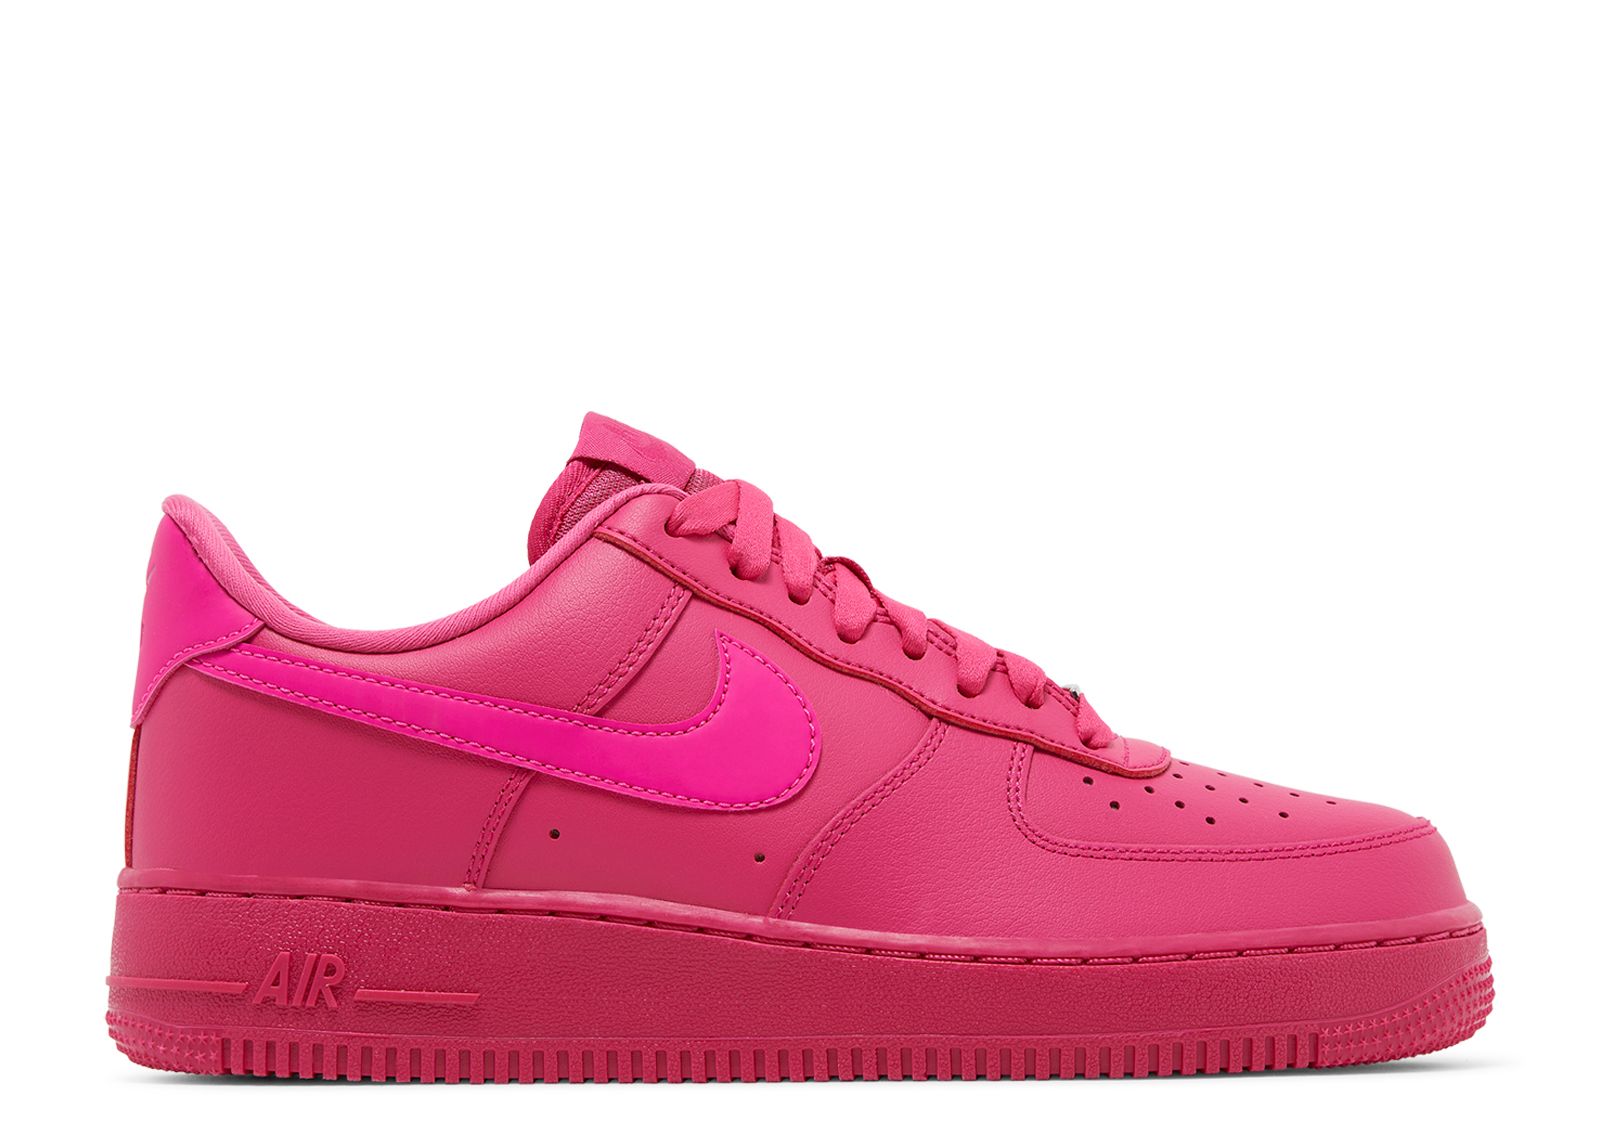 Nike WMNS Air Force 1 Low Fireberryファイヤーベリ